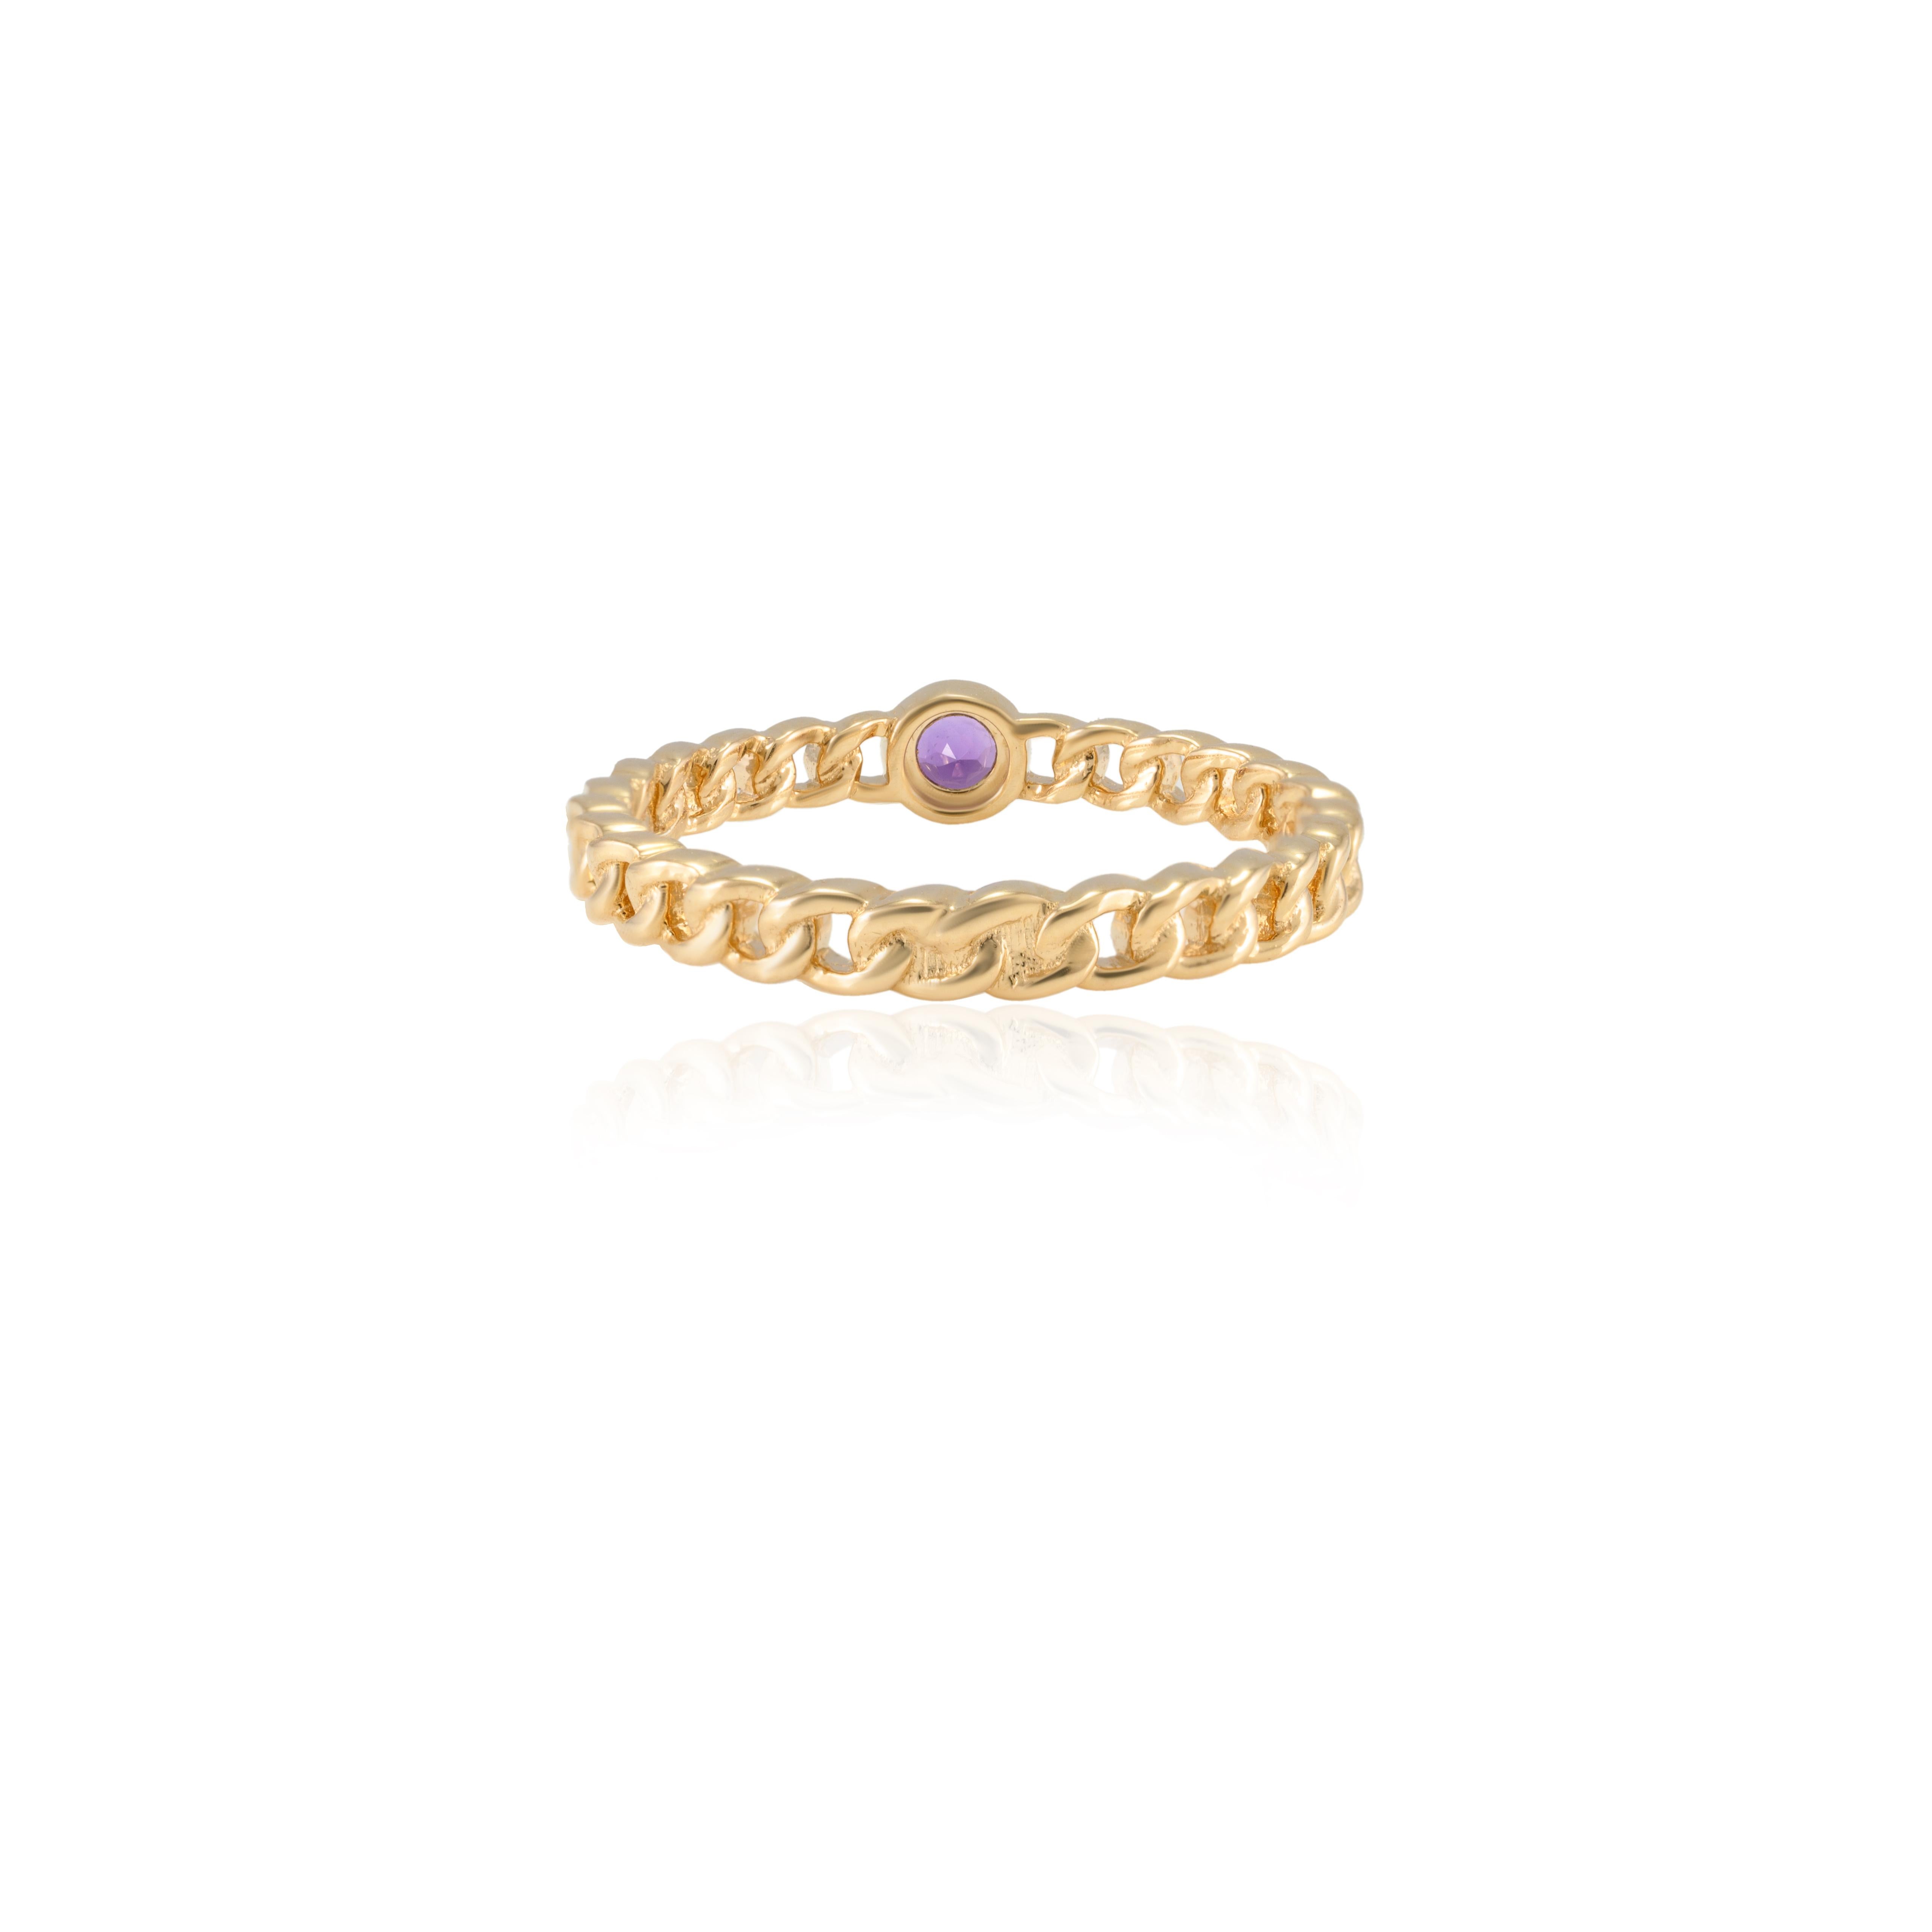 For Sale:  Dainty Round Amethyst Everyday Chain Ring Handcrafted in 14k Solid Yellow Gold 7